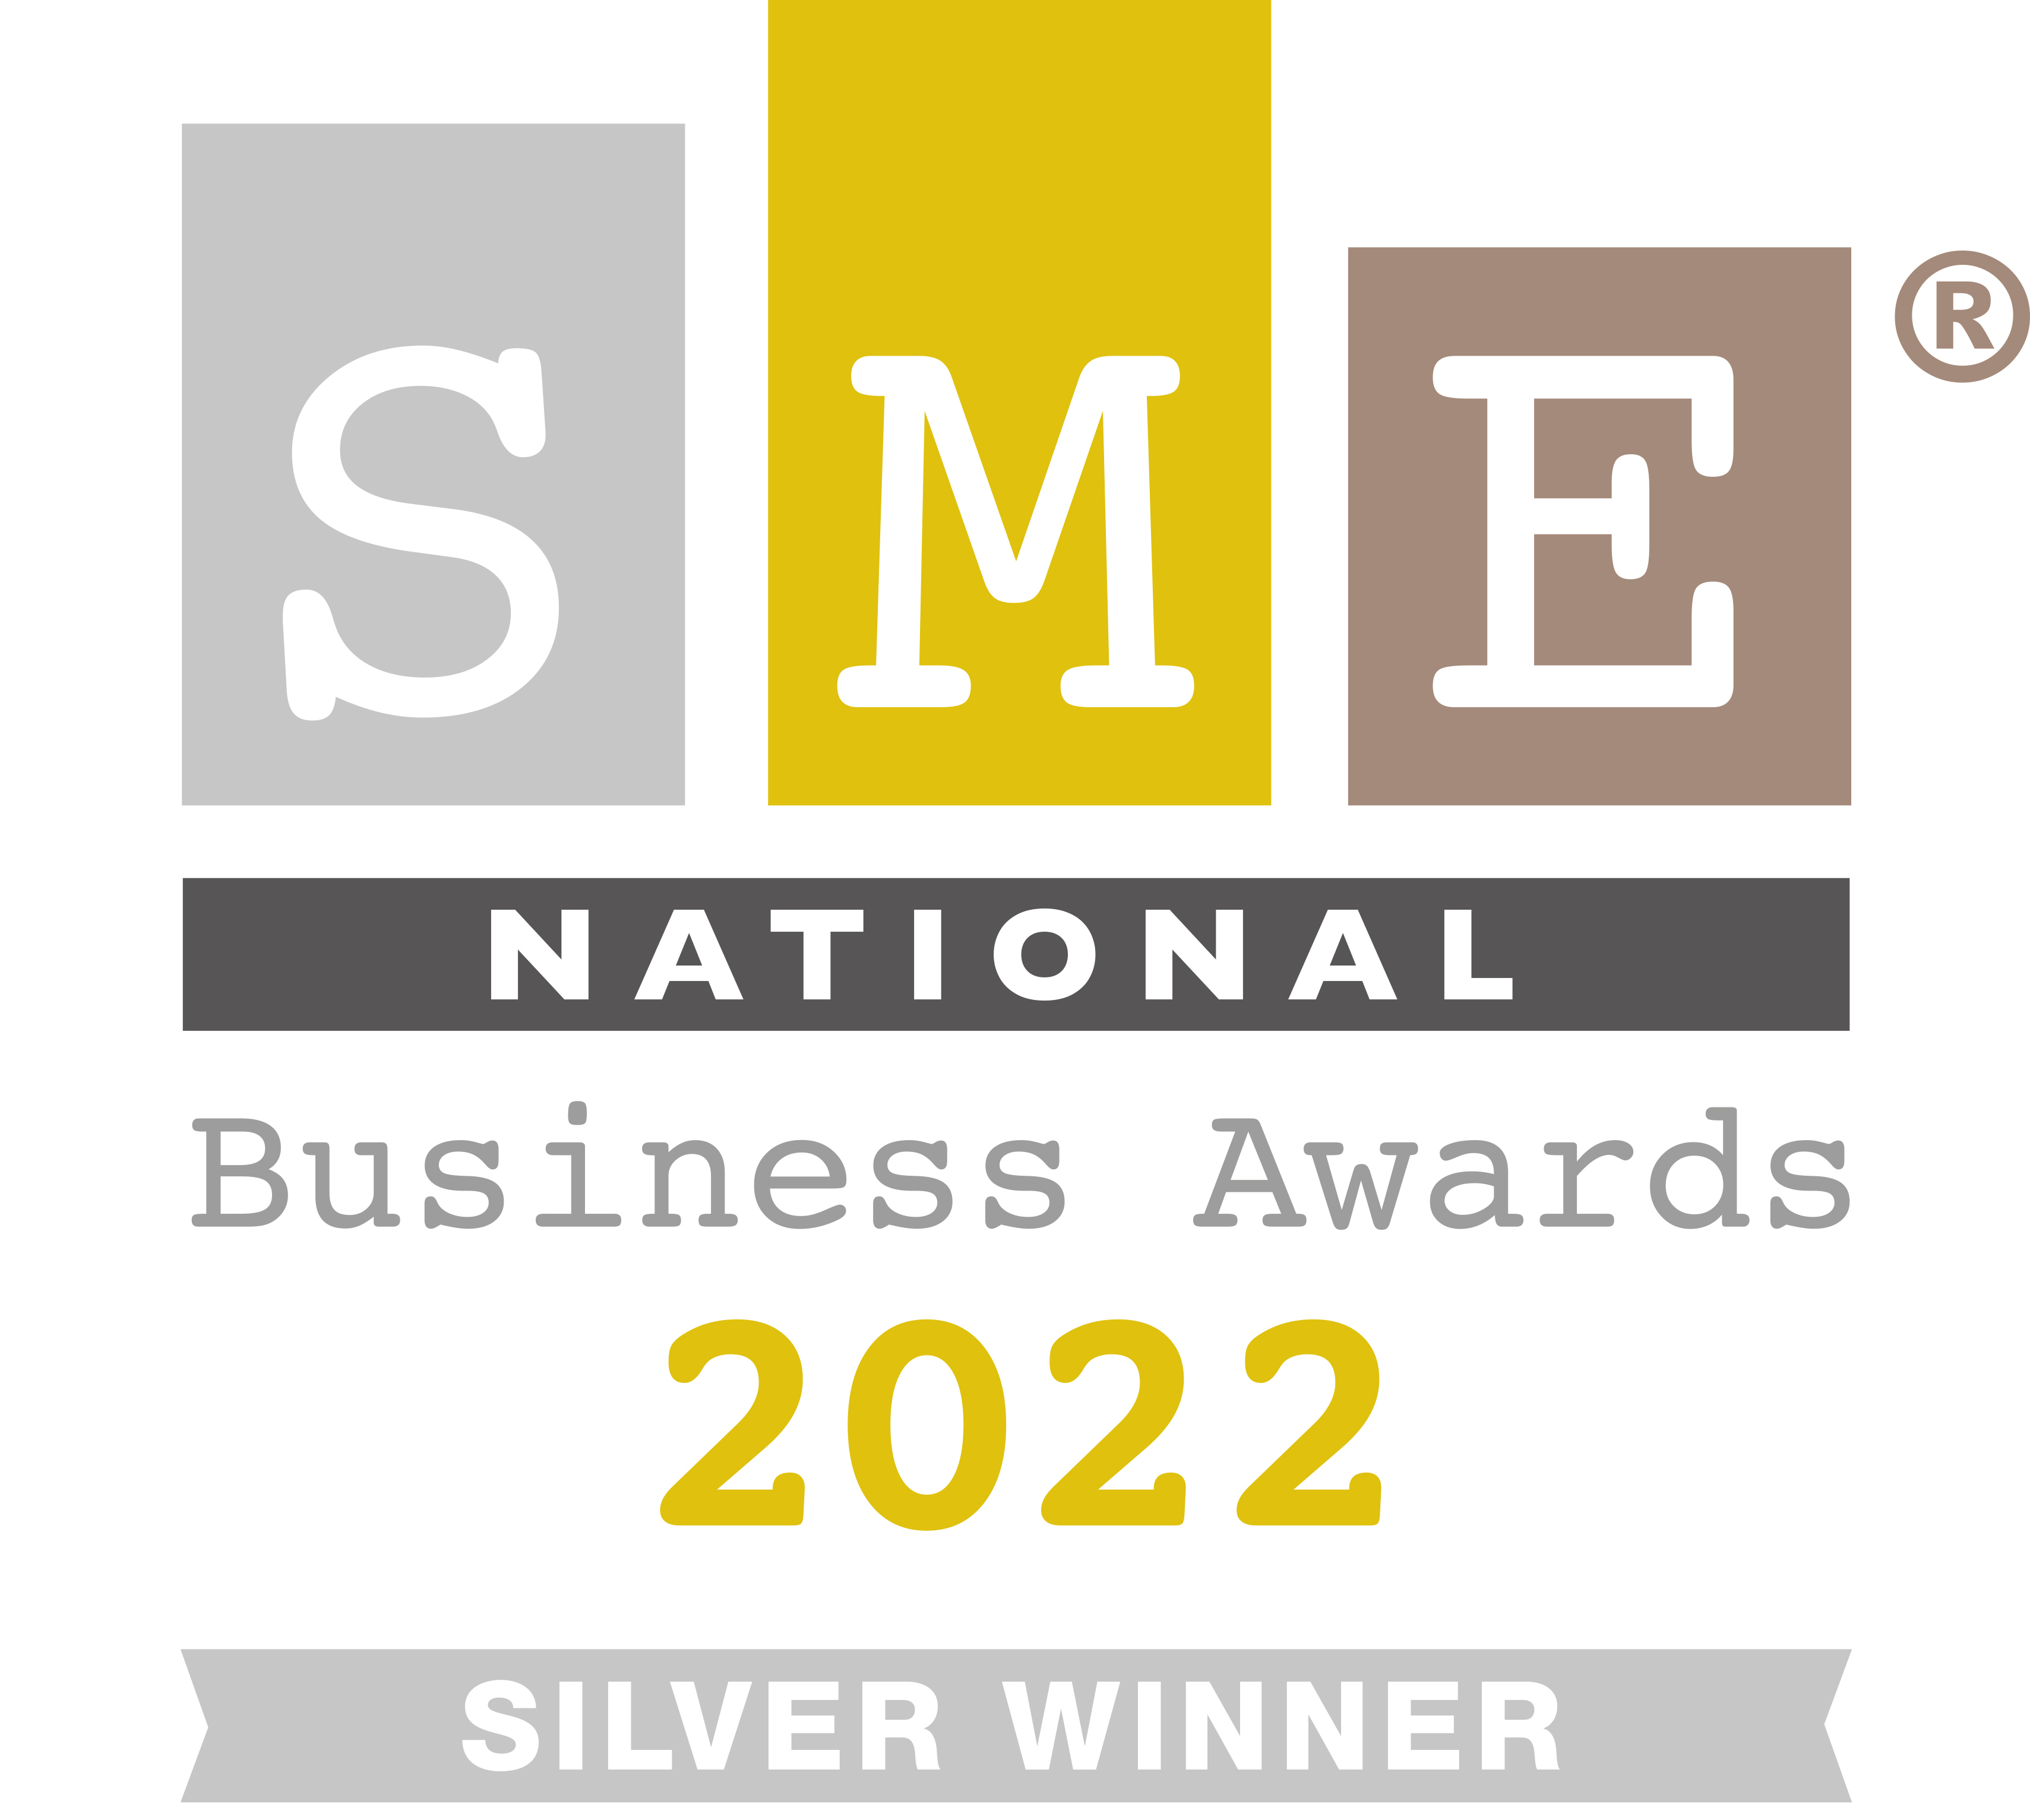 National Business Awards - Silver